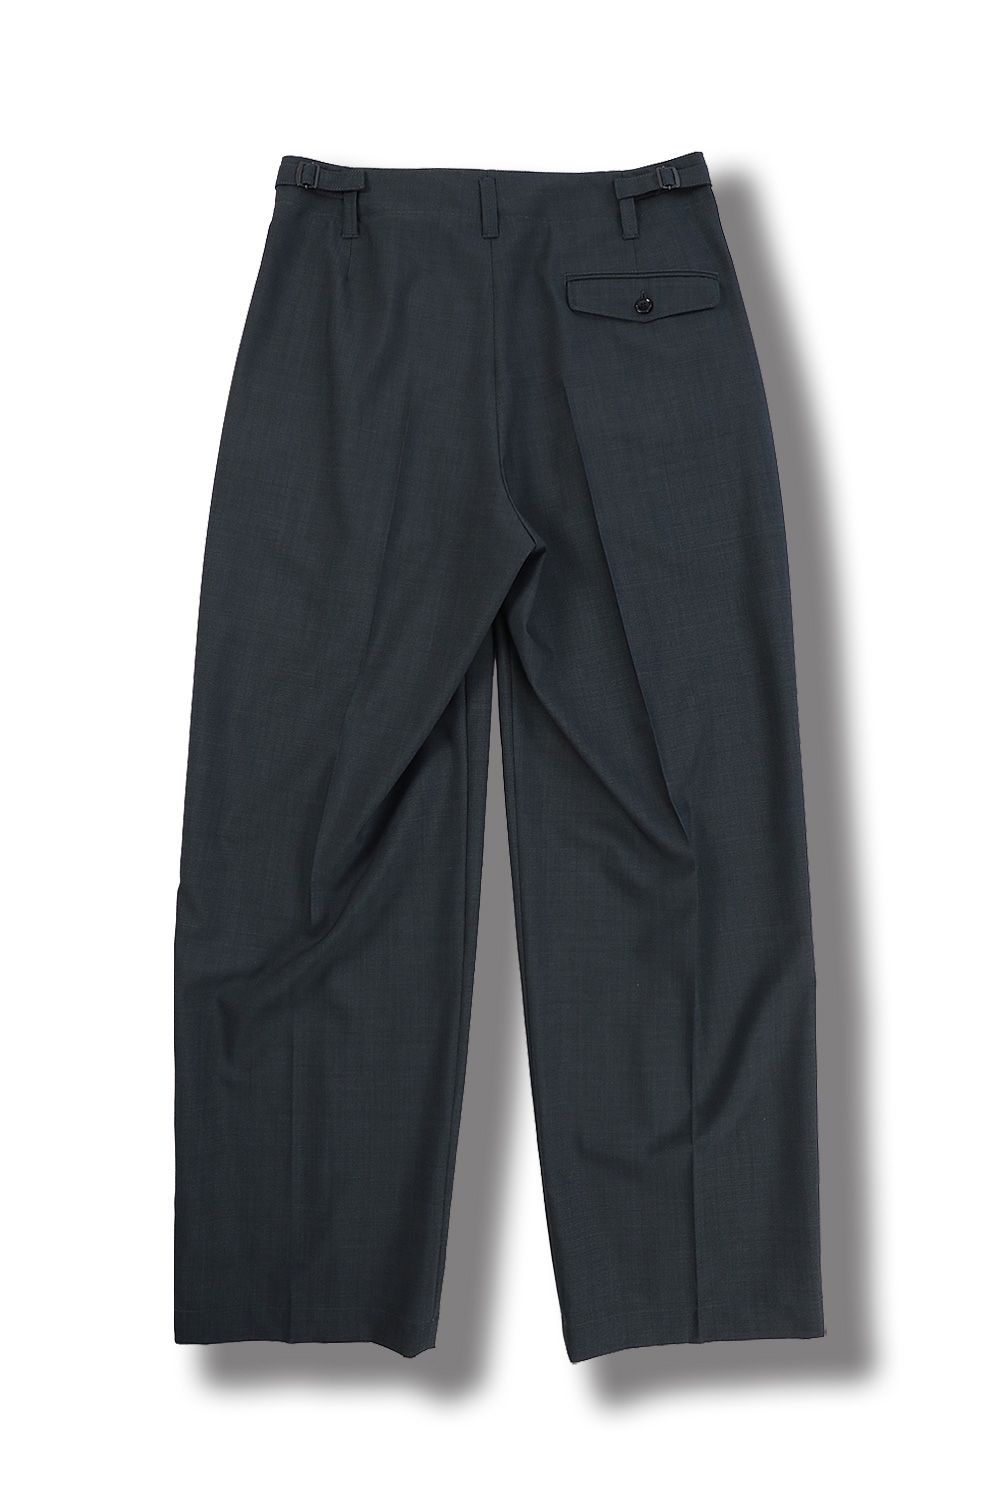 LEMAIRE BELTED PLEAT PANTS(IRON GREY)